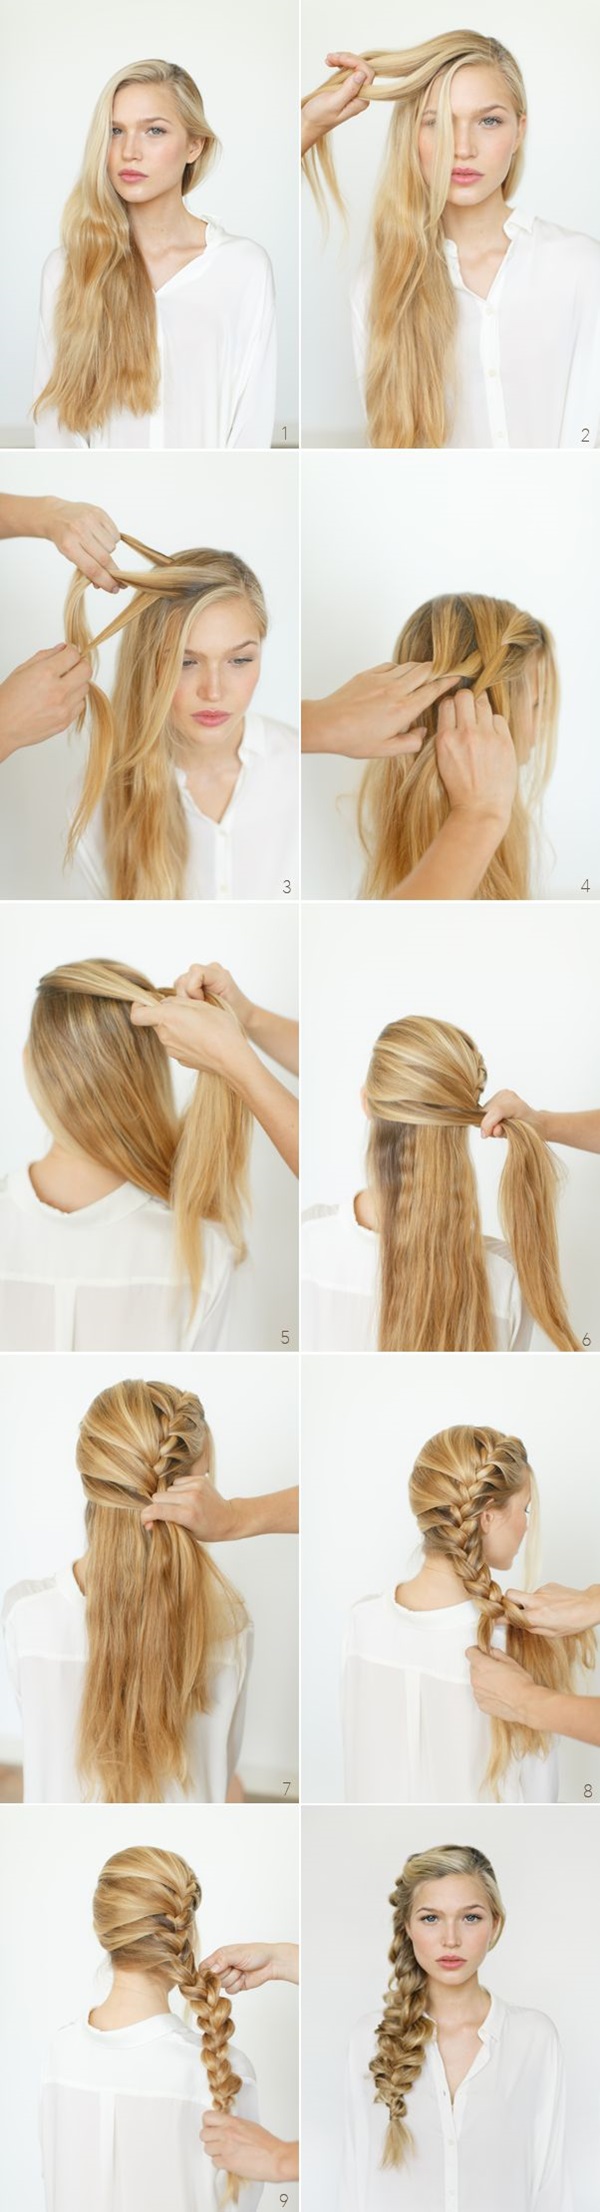 Simple Five Minute Hairstyles (10)